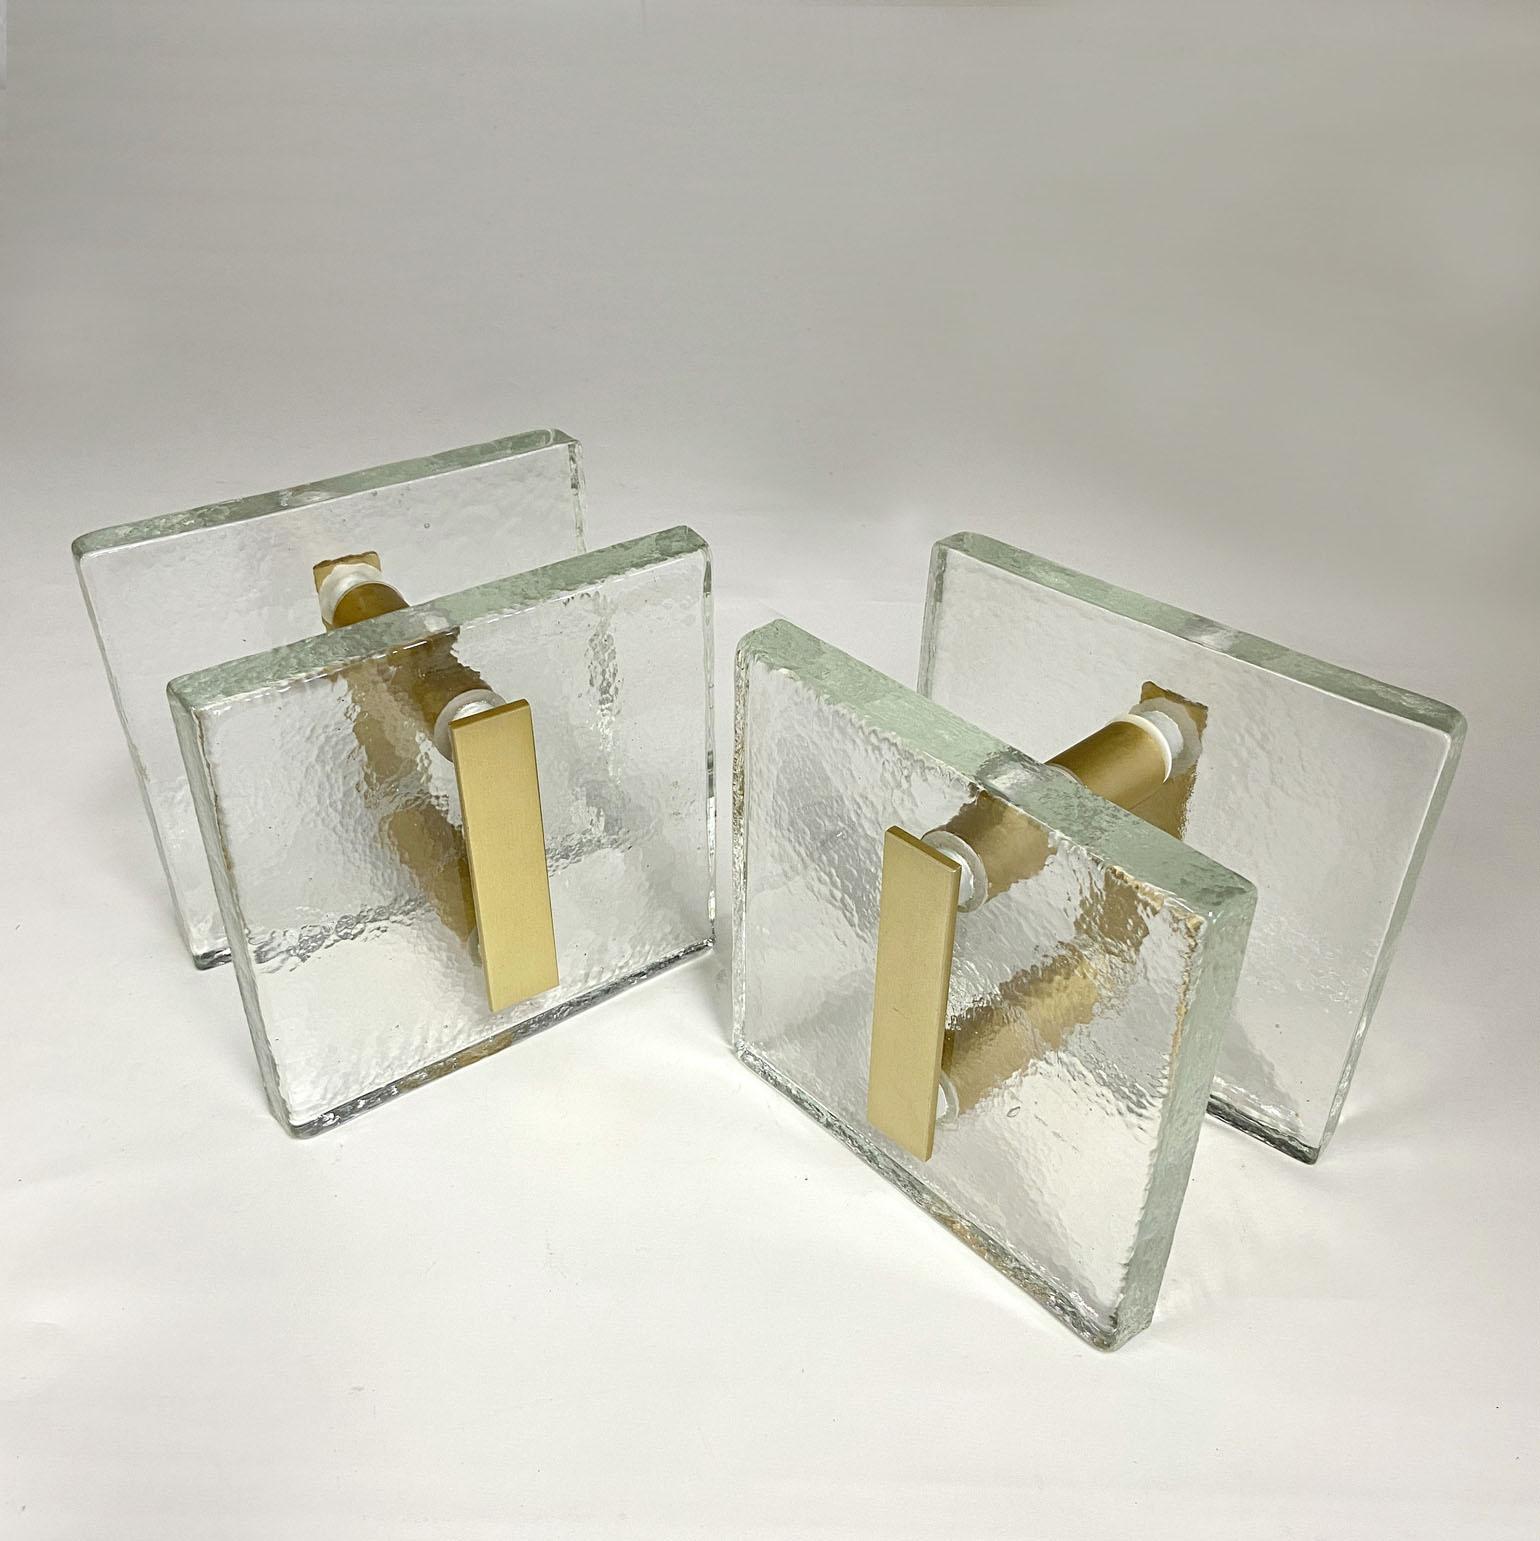 A pair of double door handles, push and pull, square textured clear cast glass with mat gold anodised aluminum. They are designed for a glass or wooden doors but suitable for any kind of doors. The glass slabs are cast by directing molten glass into